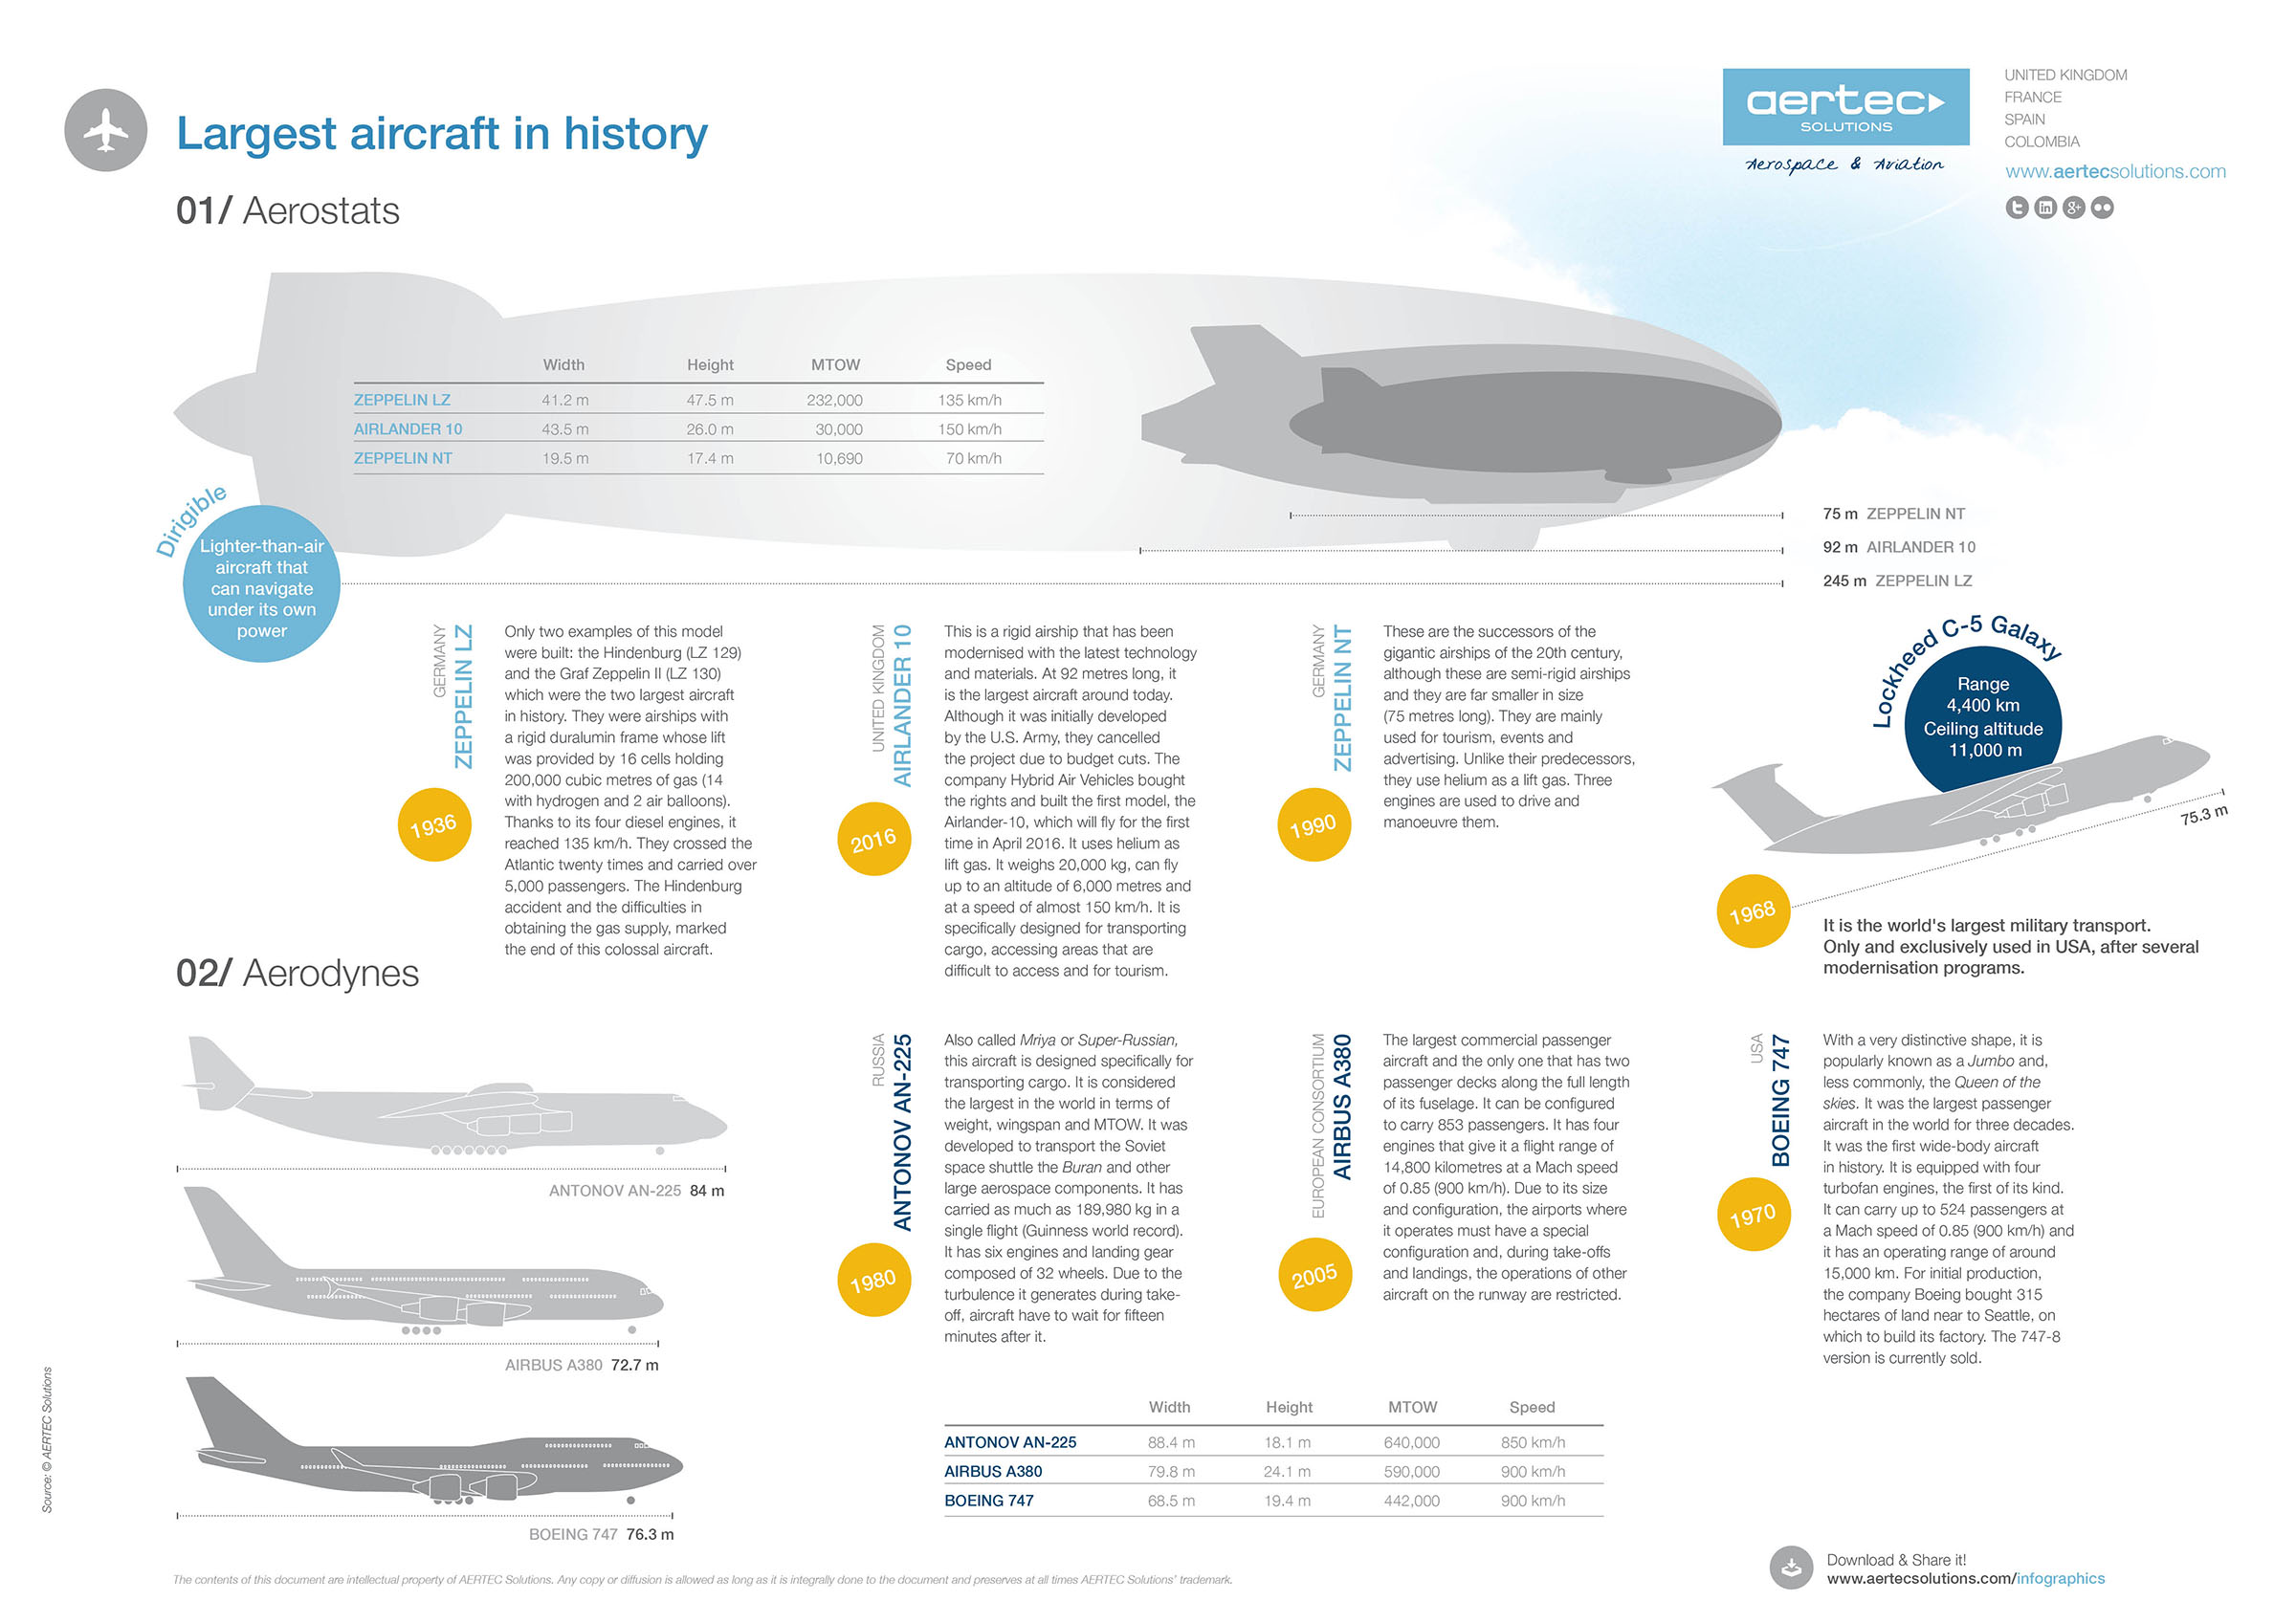 The largest aircraft in history